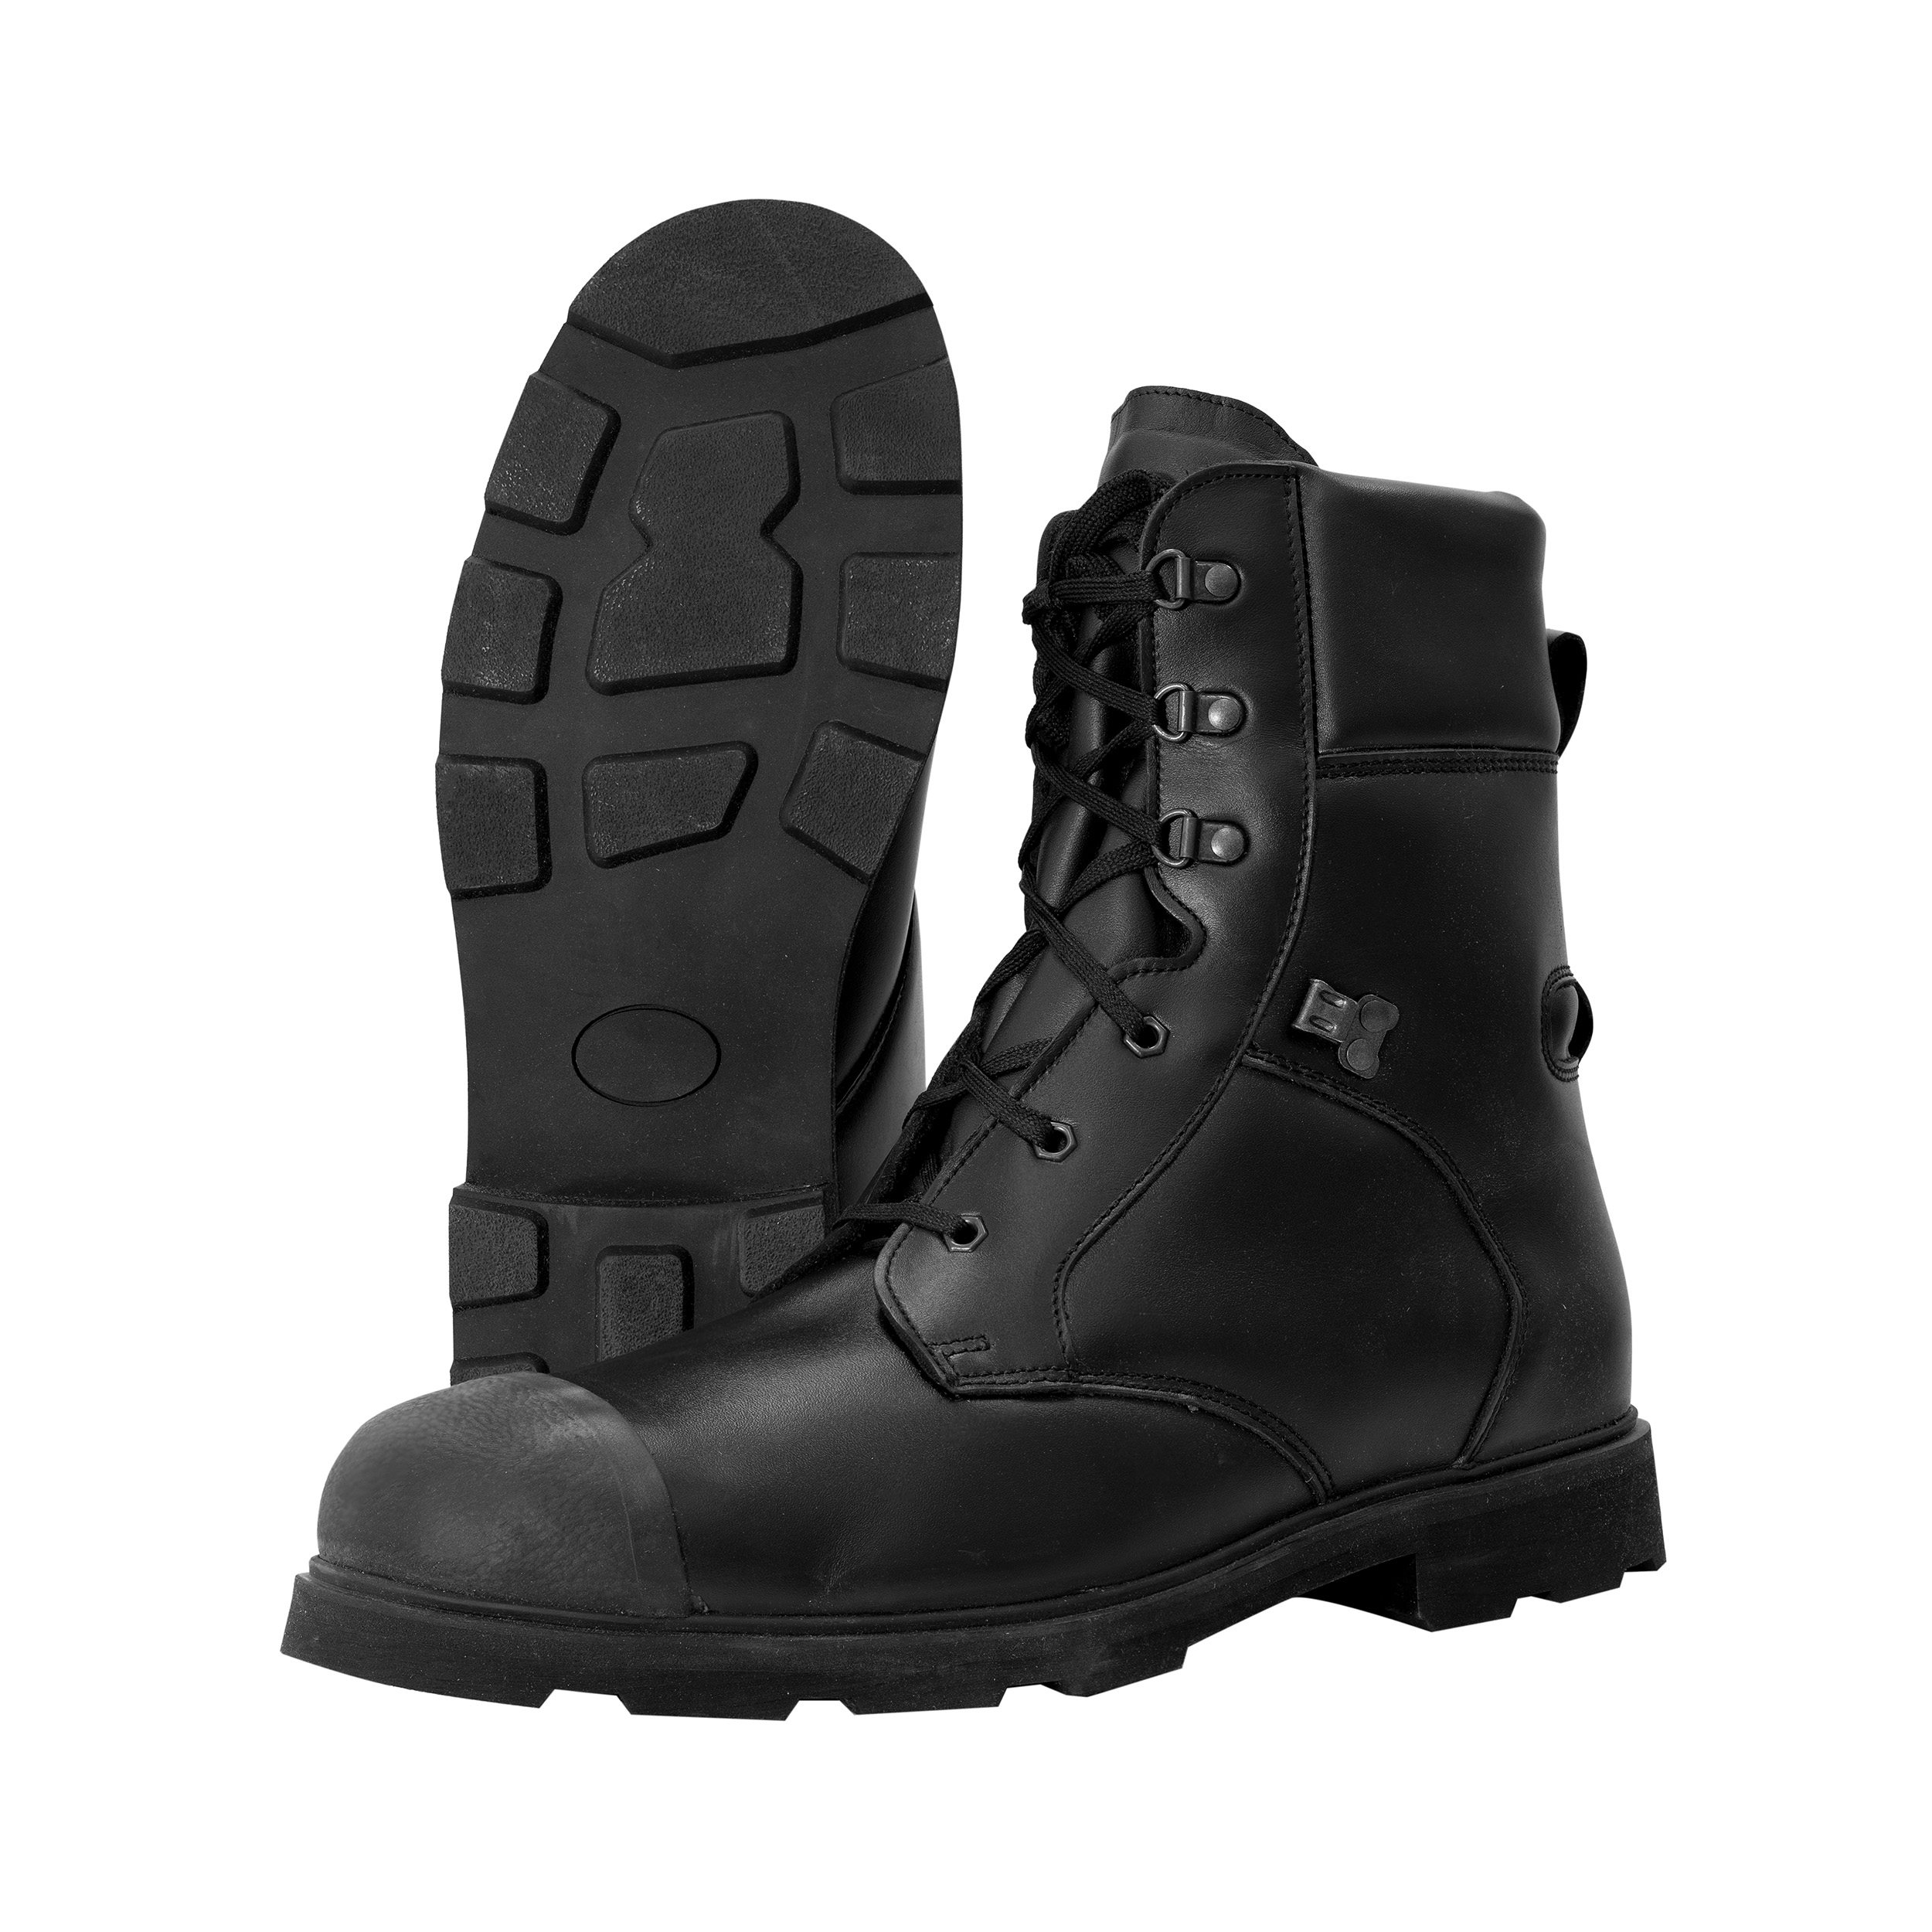 Winter Full Leather Boots ILS Czech Army S20454 L-11